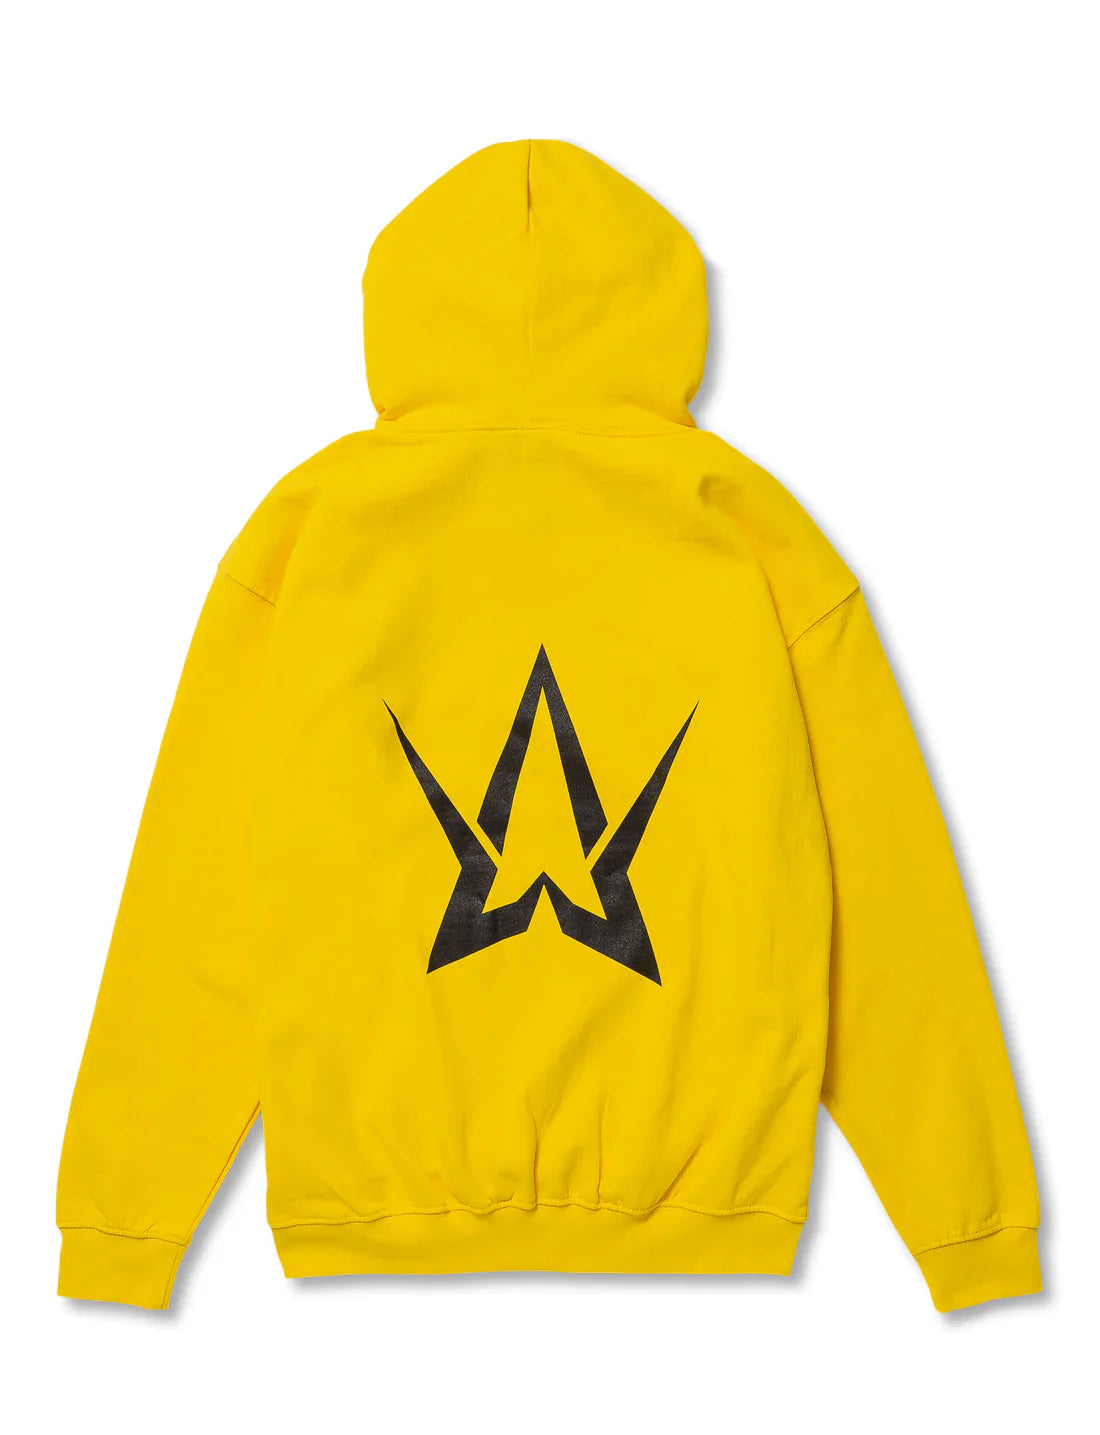 Back view of the Yellow Walkerverse 2.0 Hoodie featuring the iconic Alan Walker logo.